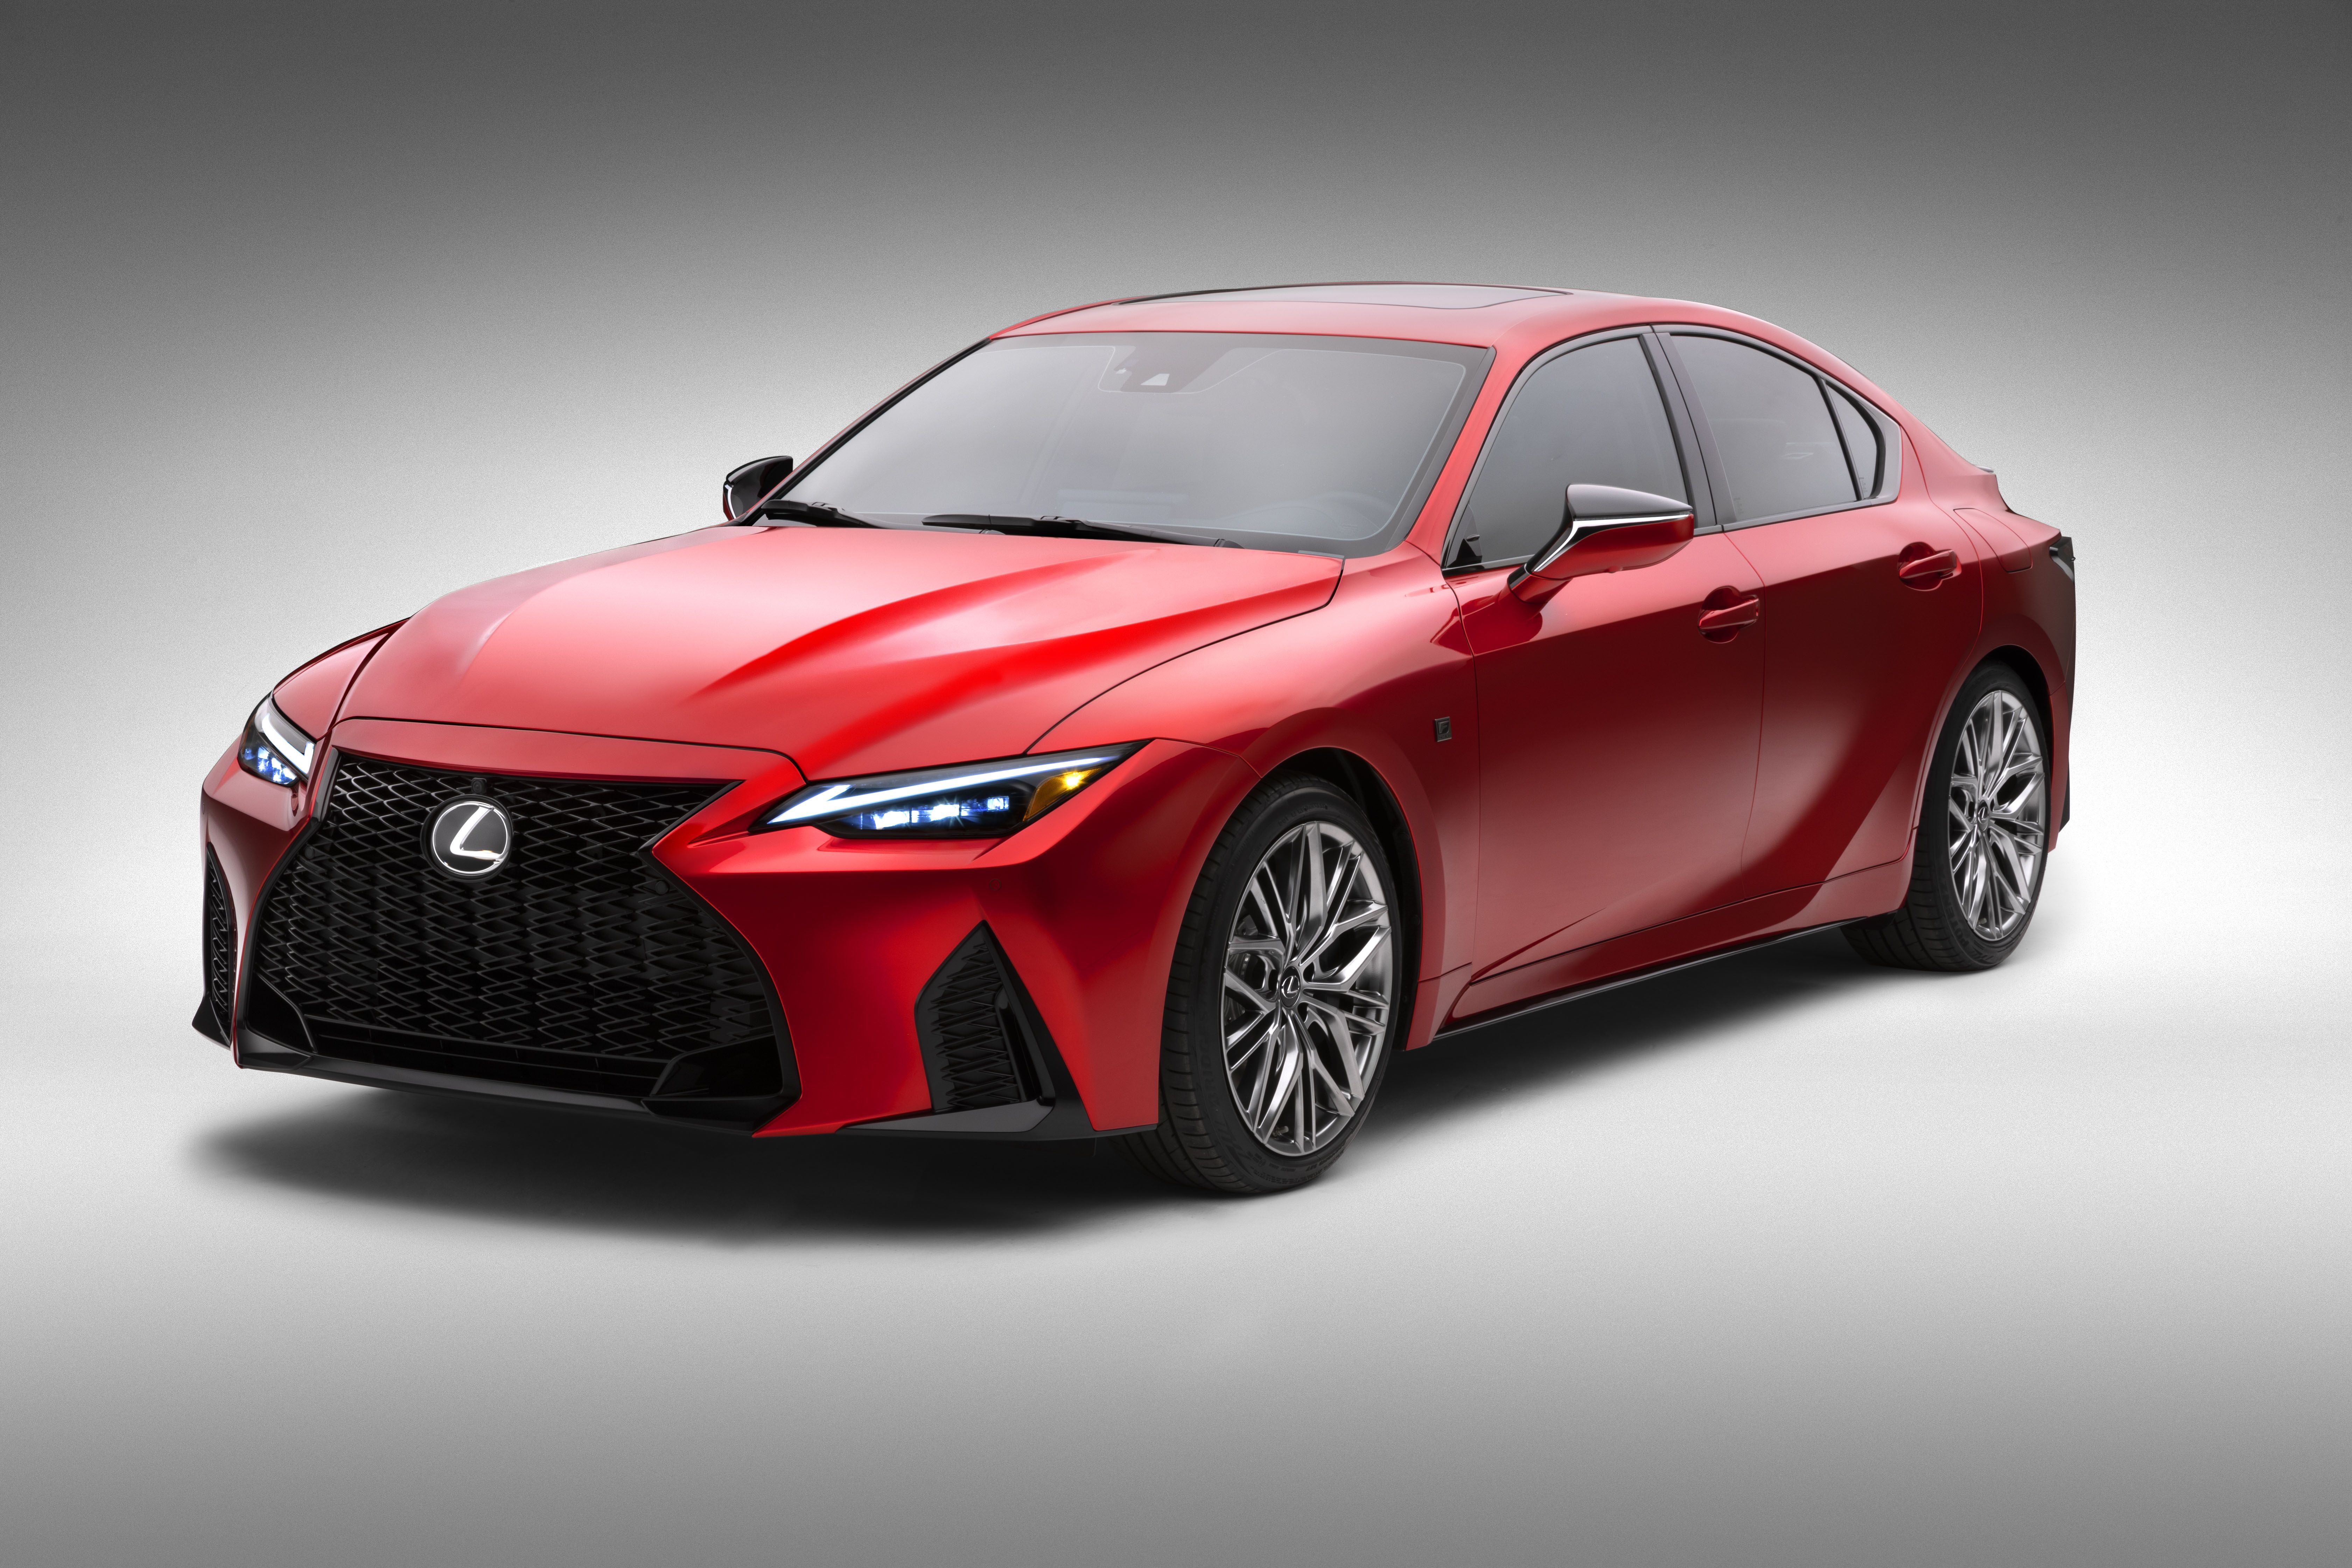 472-HP 2022 Lexus IS500 F Sport Brings the 5.0L V-8 Back to the IS